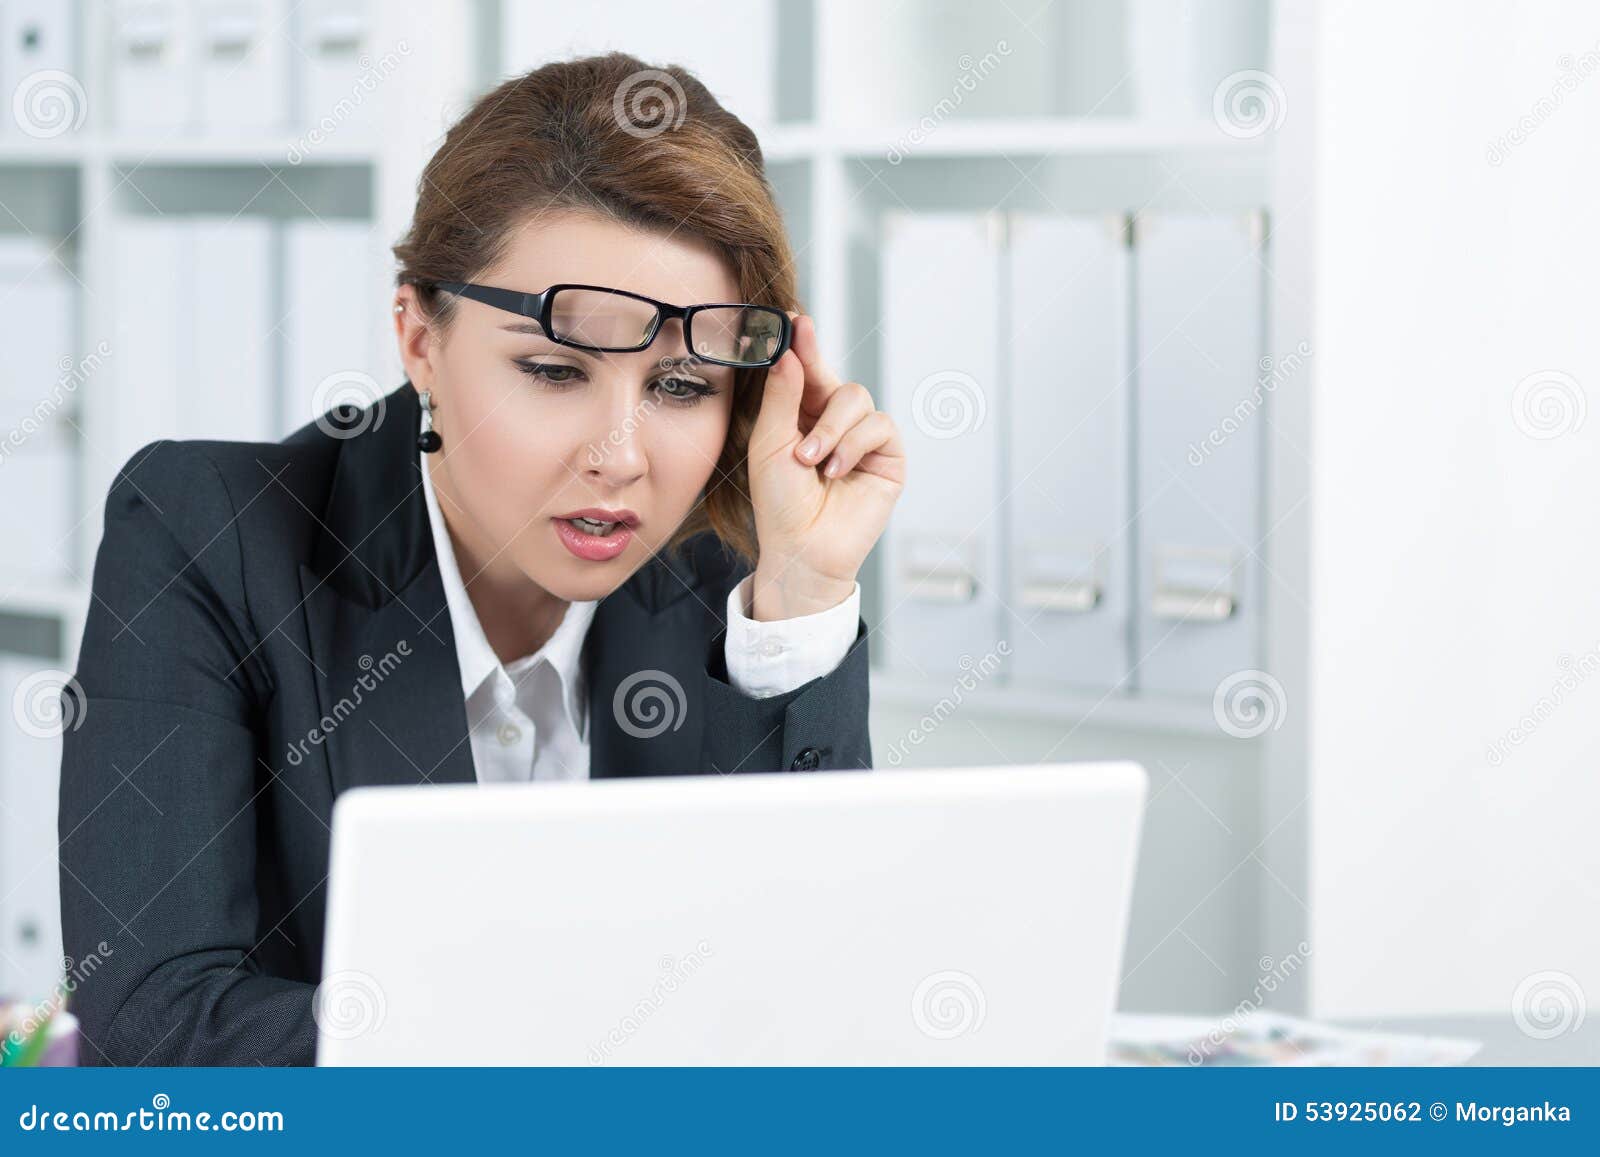 young business woman looking intently at laptop